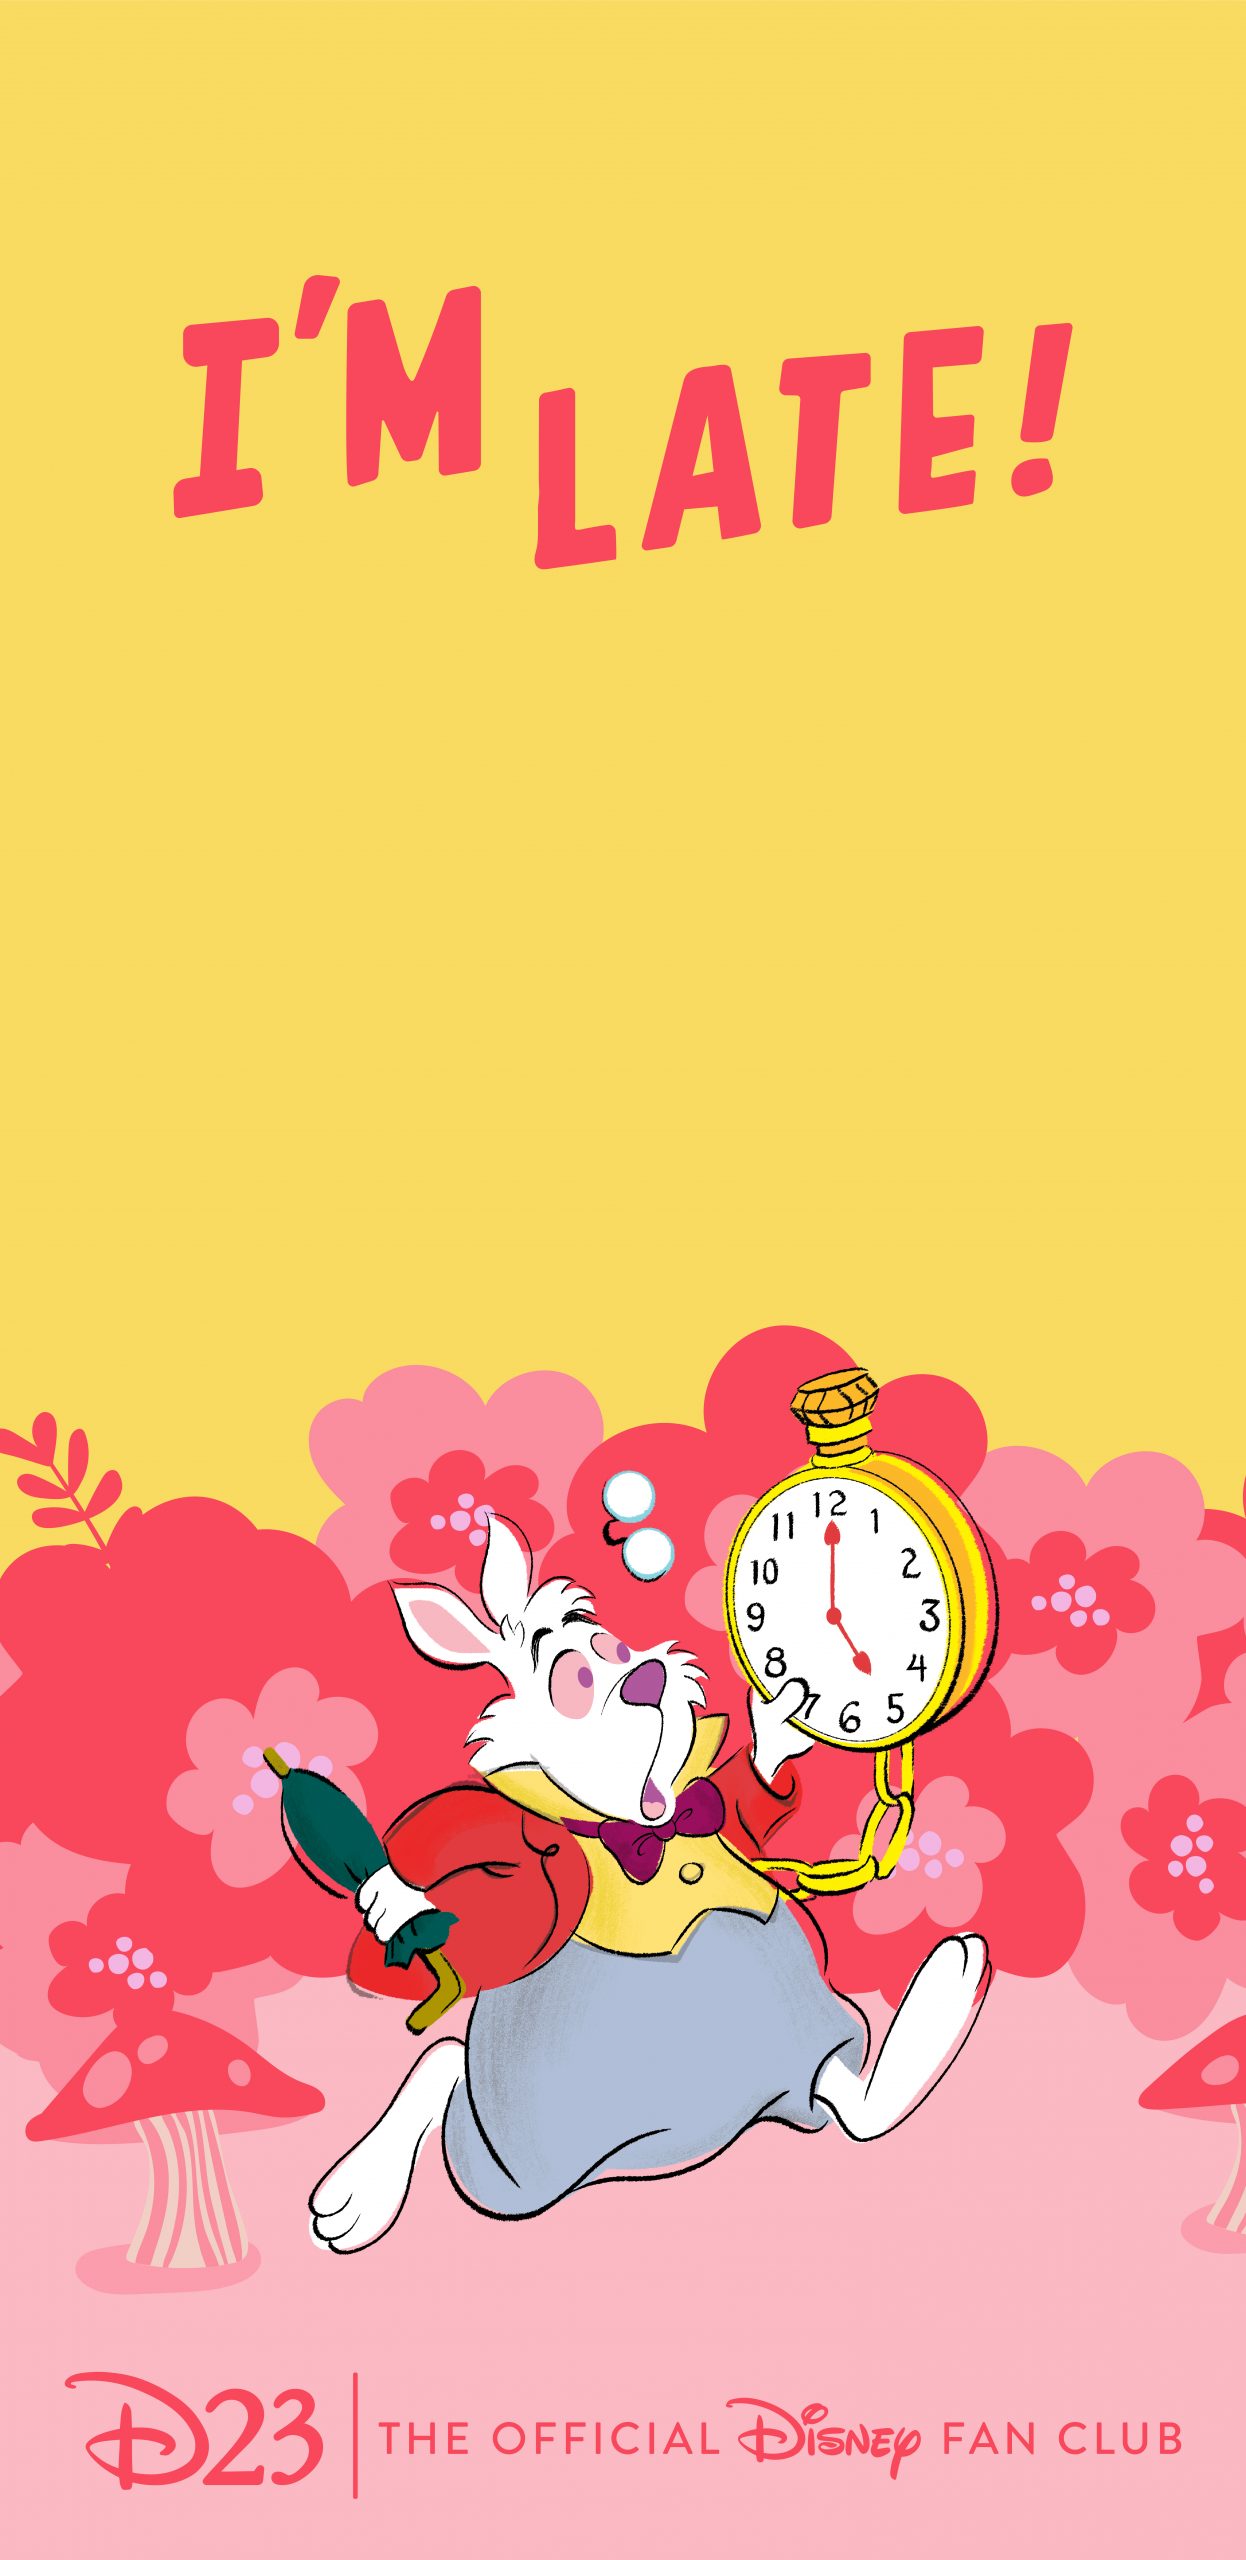 Make Your Phone a Wonderland with These Wallpaper Celebrating 70 Years of Alice in Wonderland